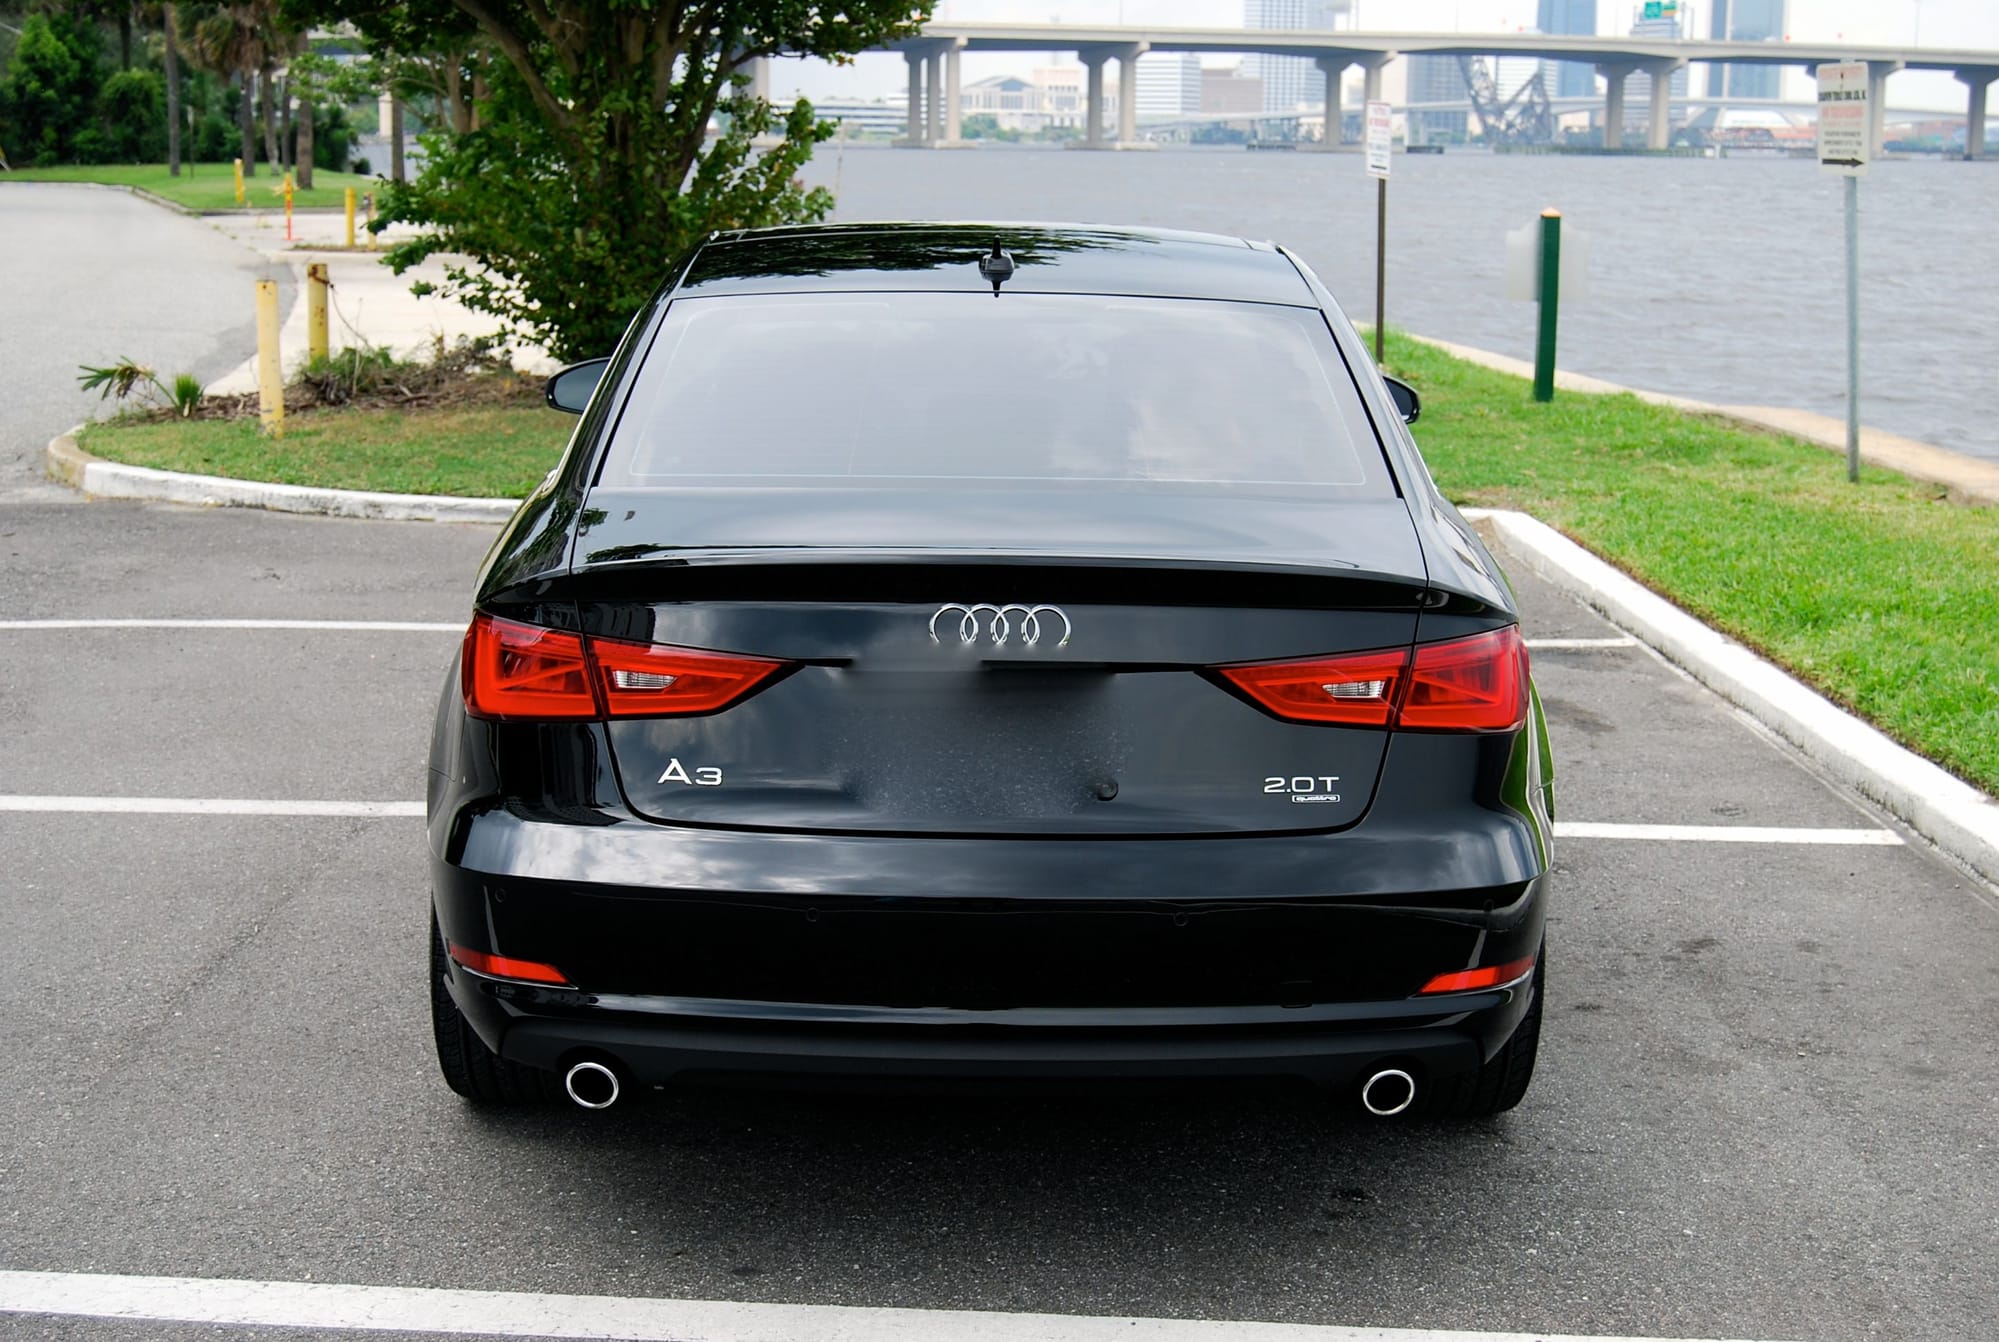 2015 A3 2.0T windows and tail lights tinted - AudiWorld Forums